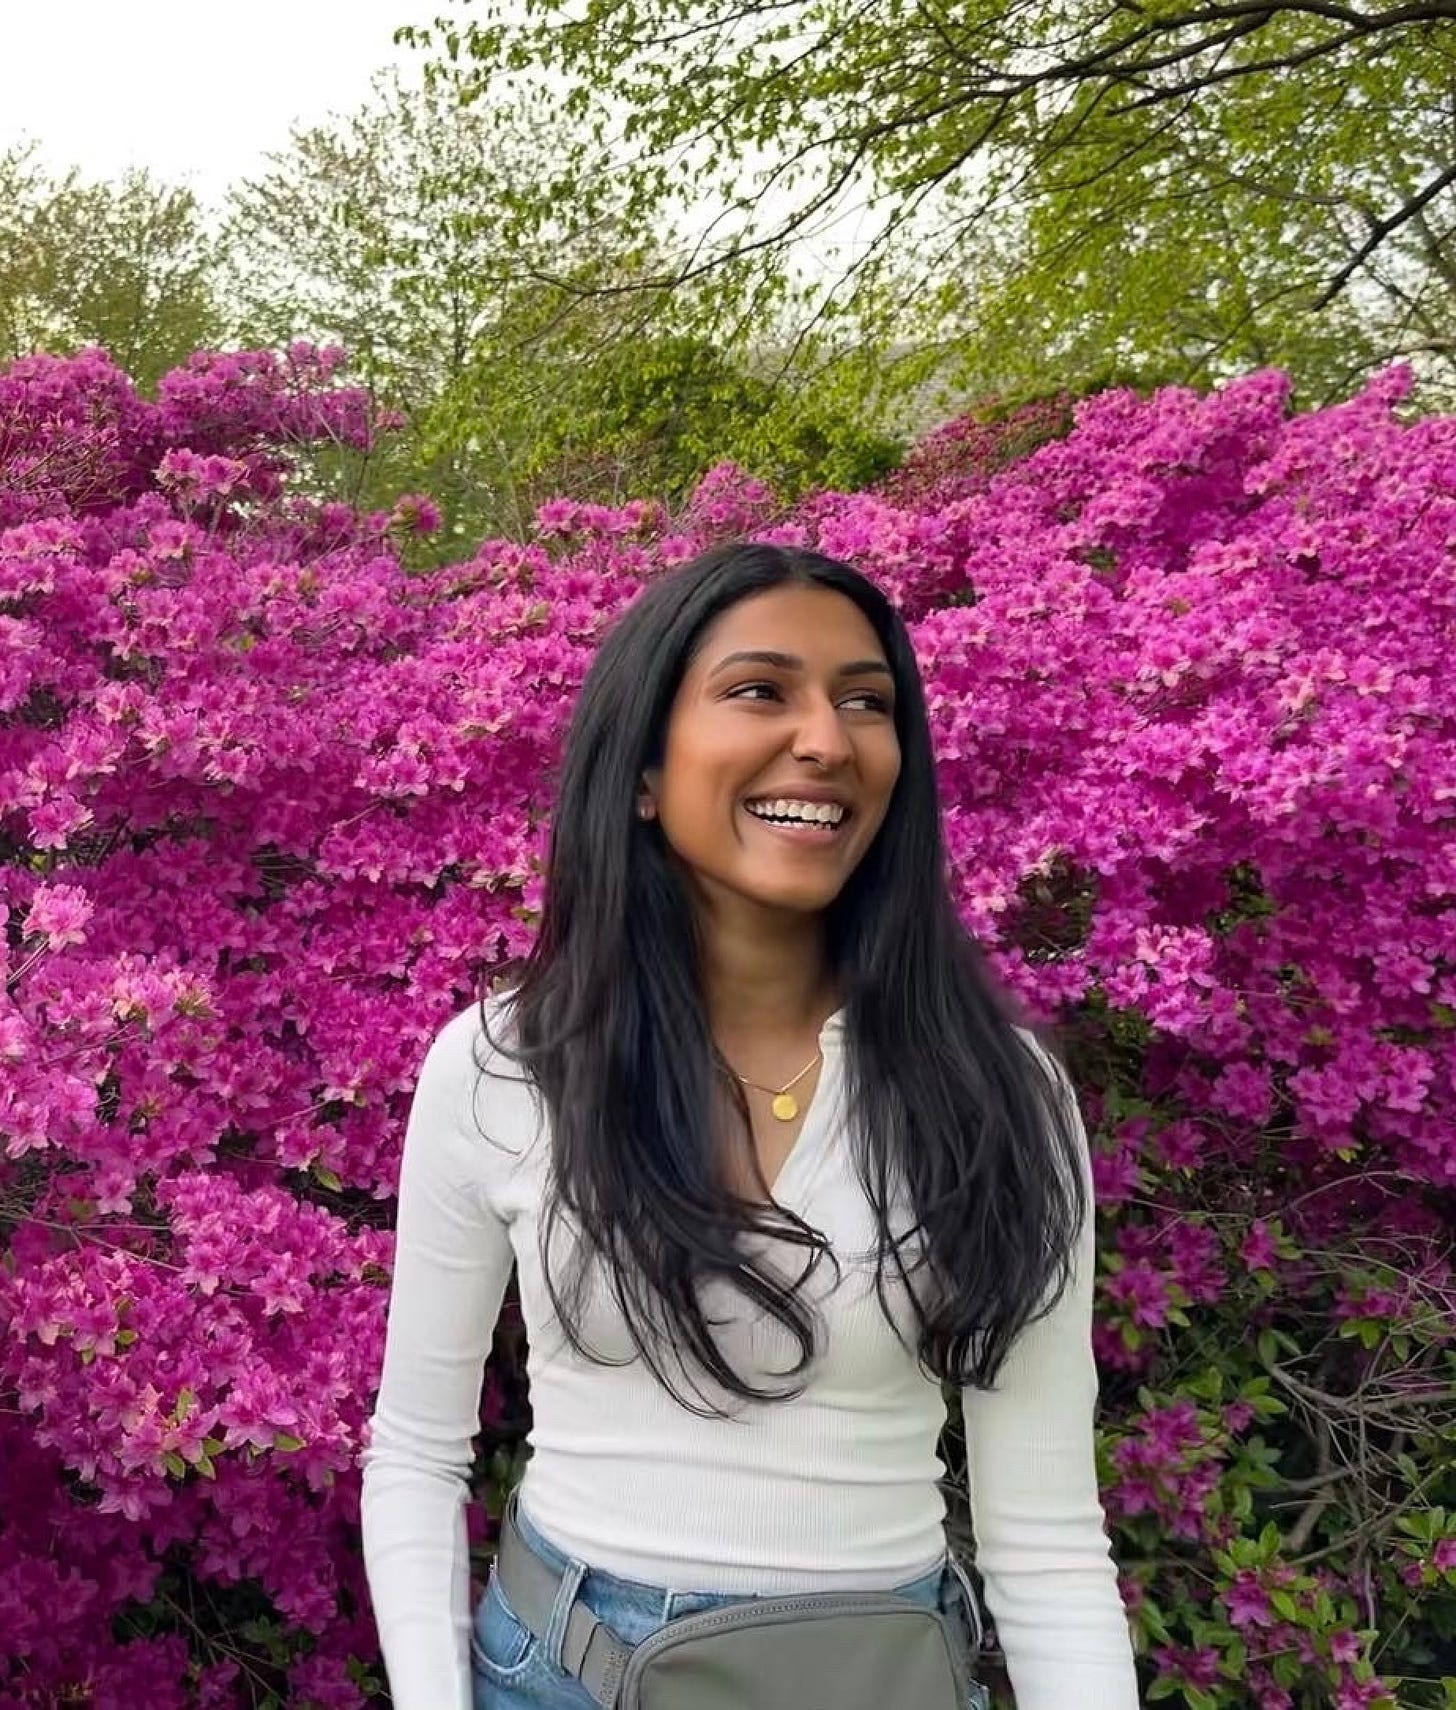 Abi smiling in a white top, blue jeans, and bag looking away from the camera in front of a wall of pinkish purple flowers.